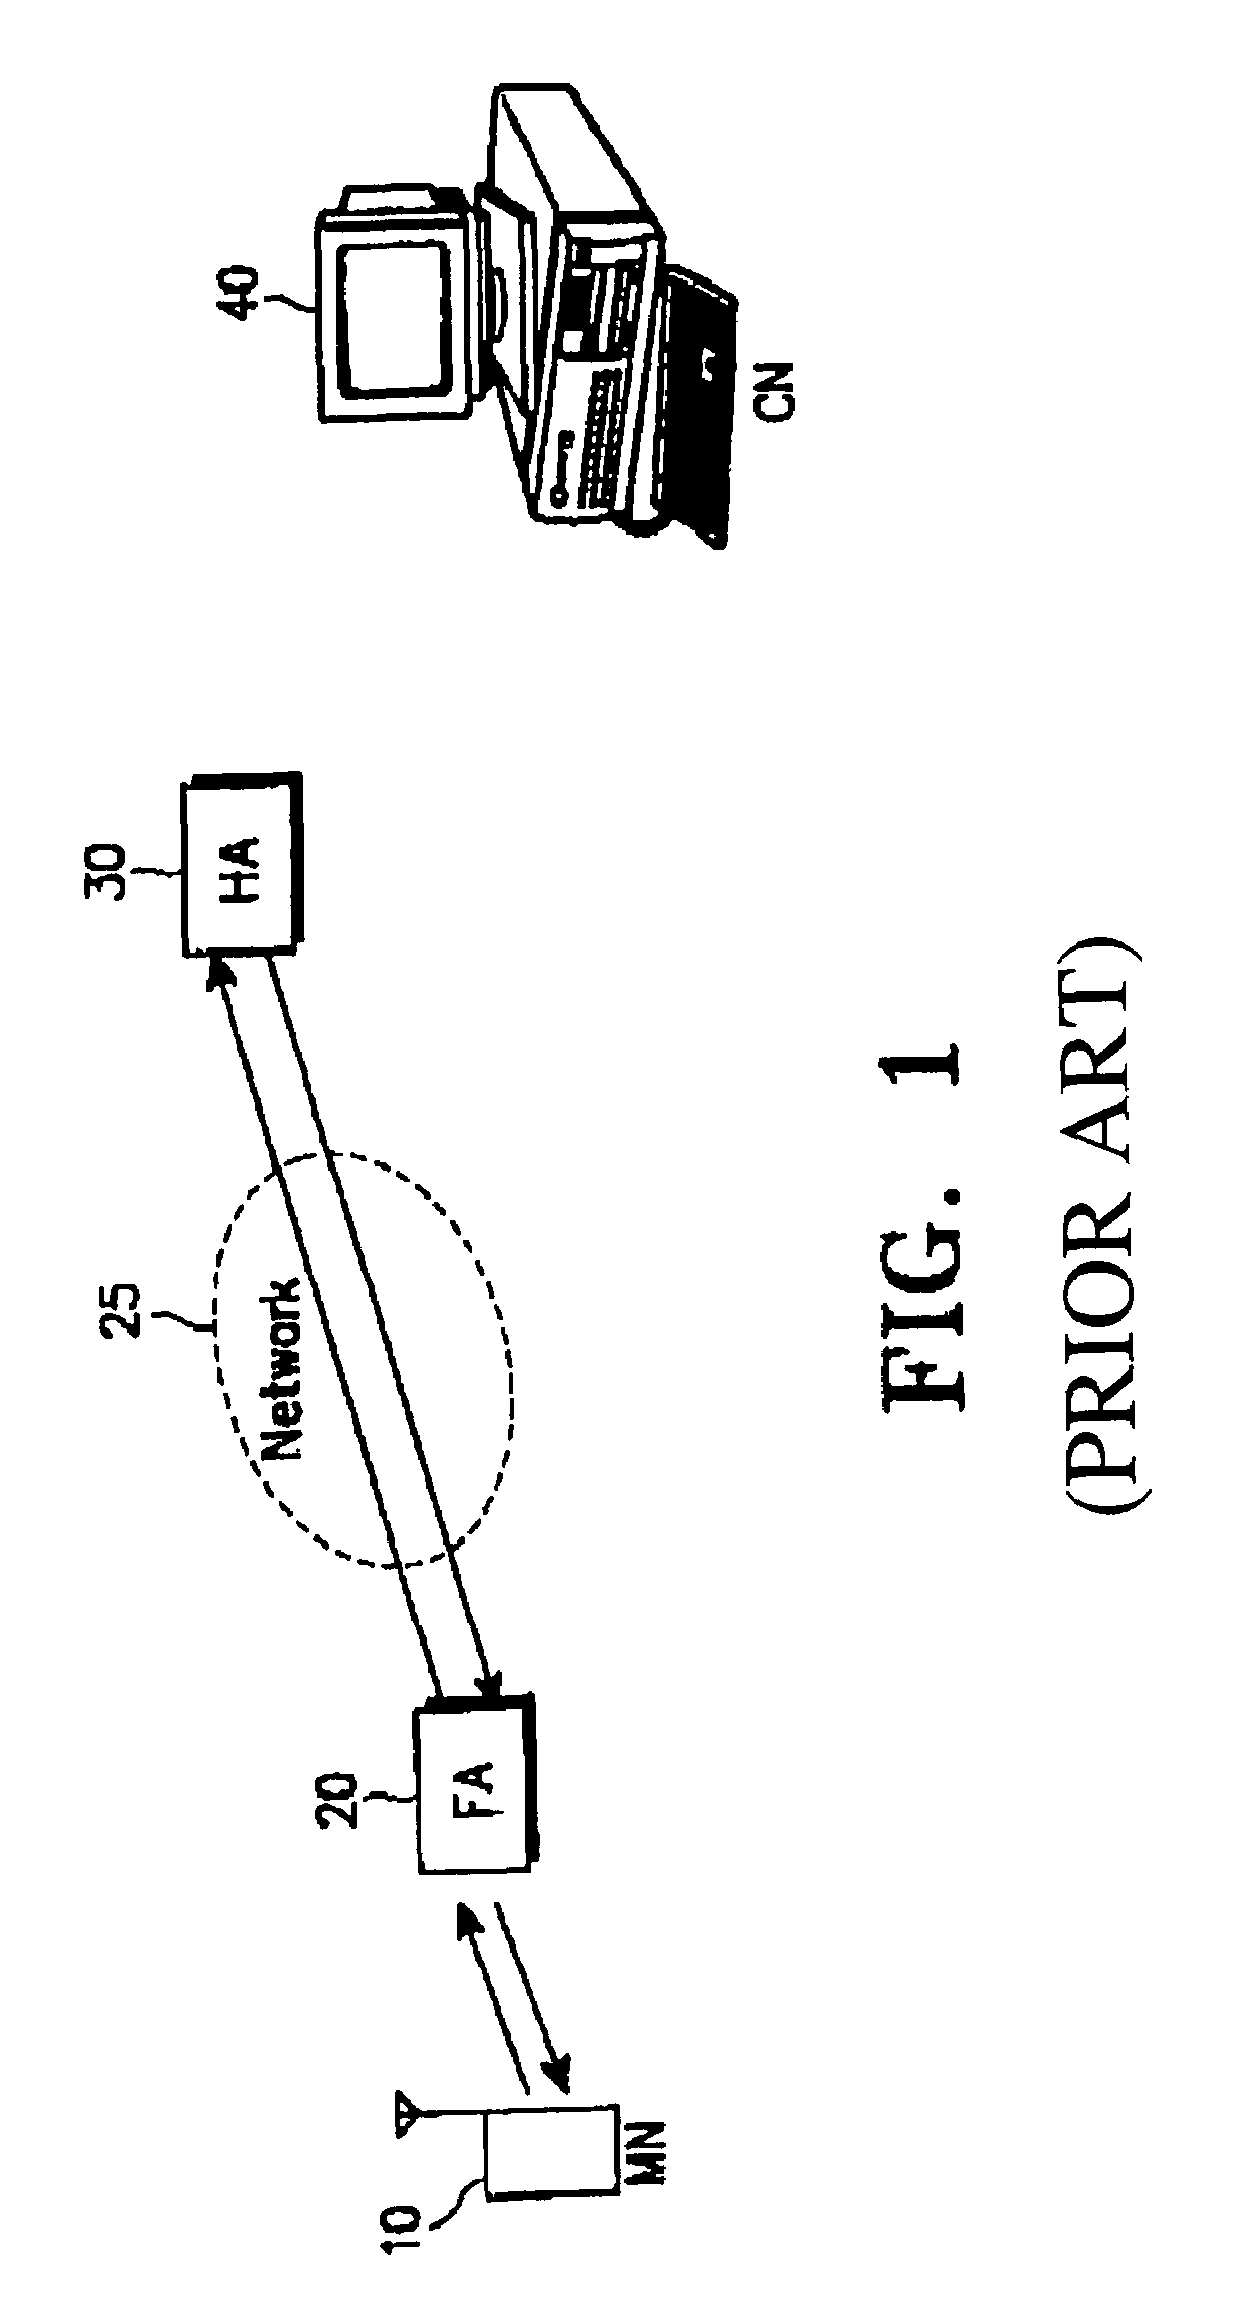 System and method for assigning a mobile IP to a mobile node